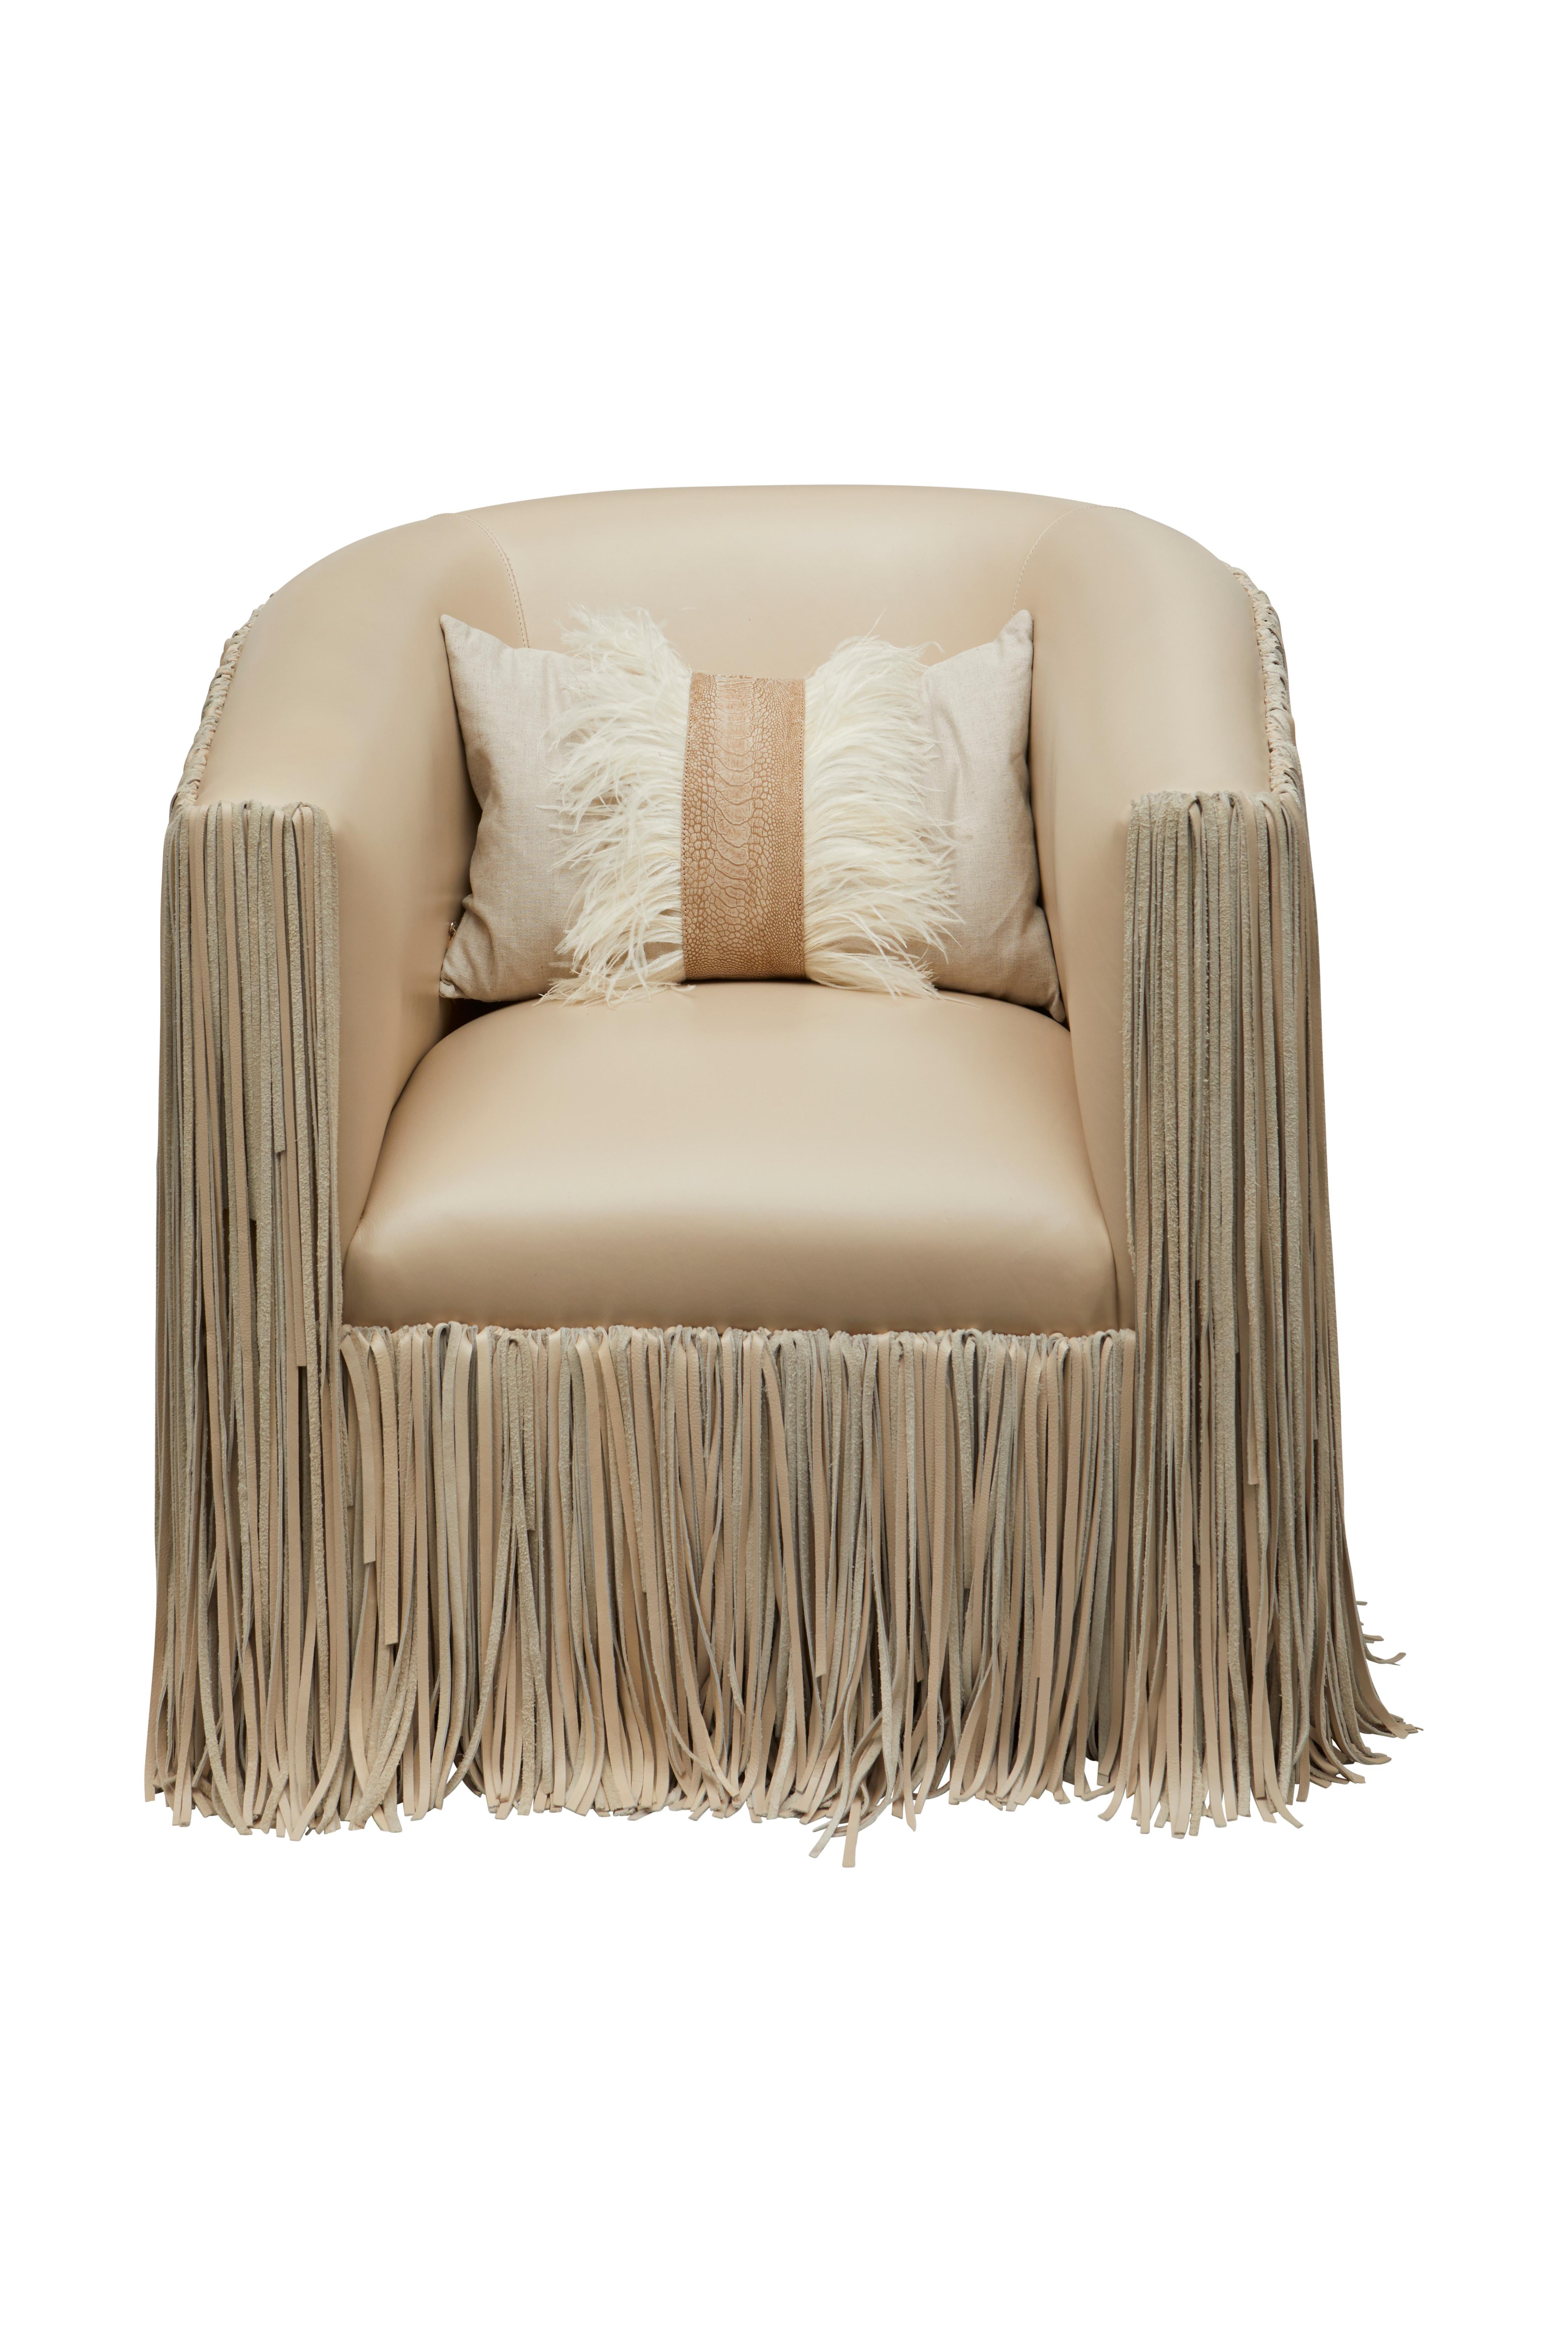 Contemporary Chair, Shaggy Leather Swivel in Cream-Stone For Sale